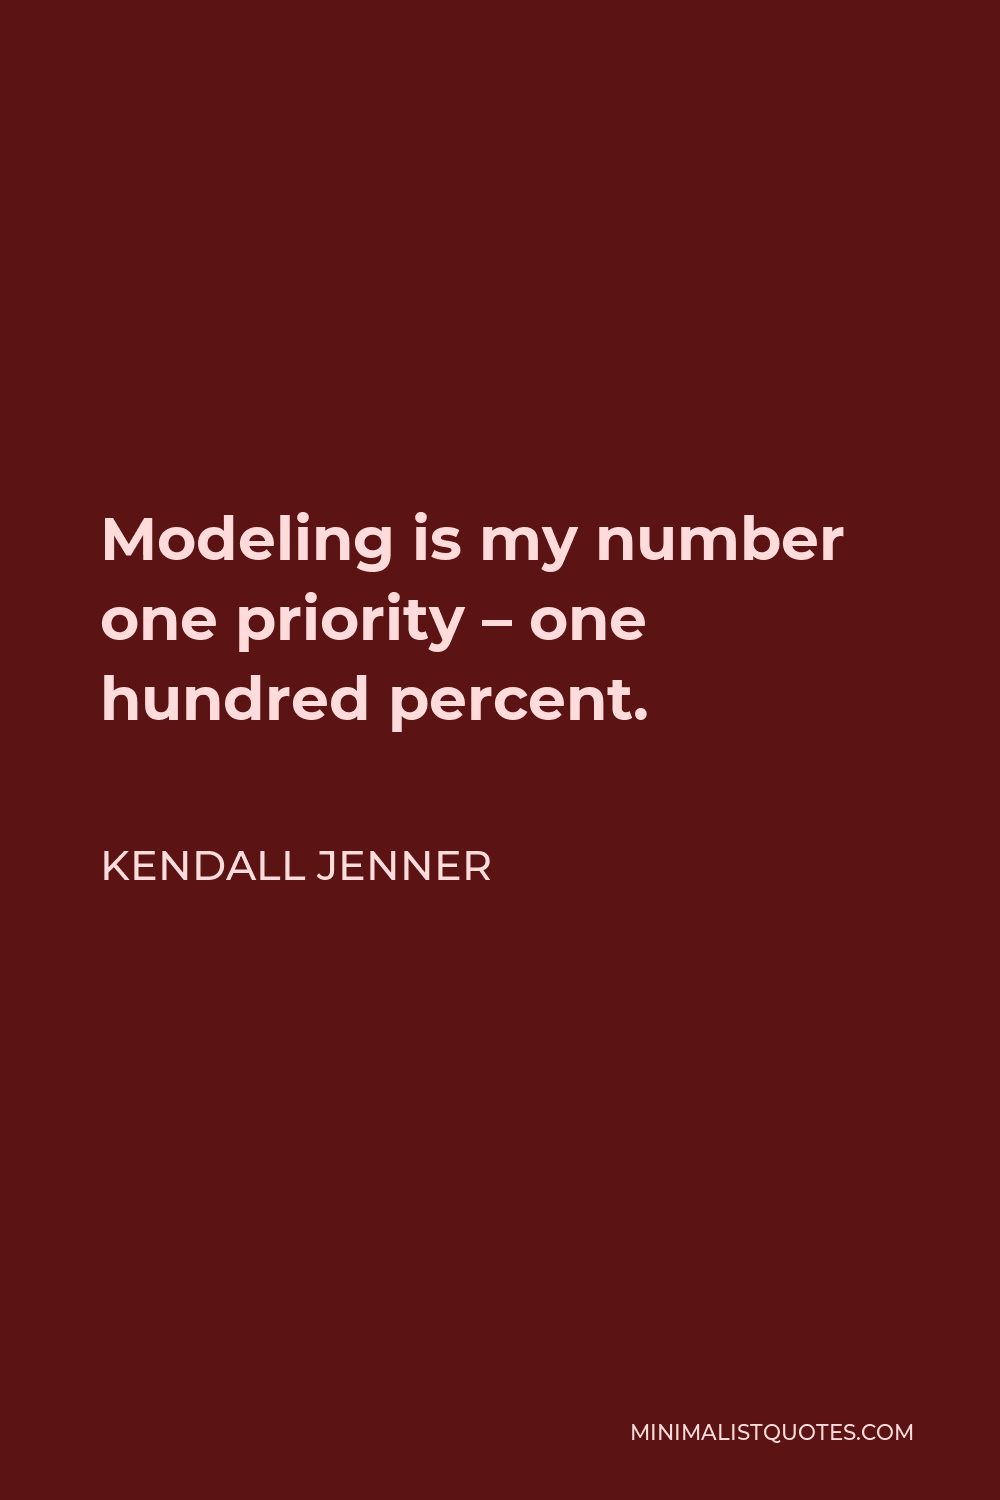 Kendall Jenner Quote - Modeling is my number one priority – one hundred percent.